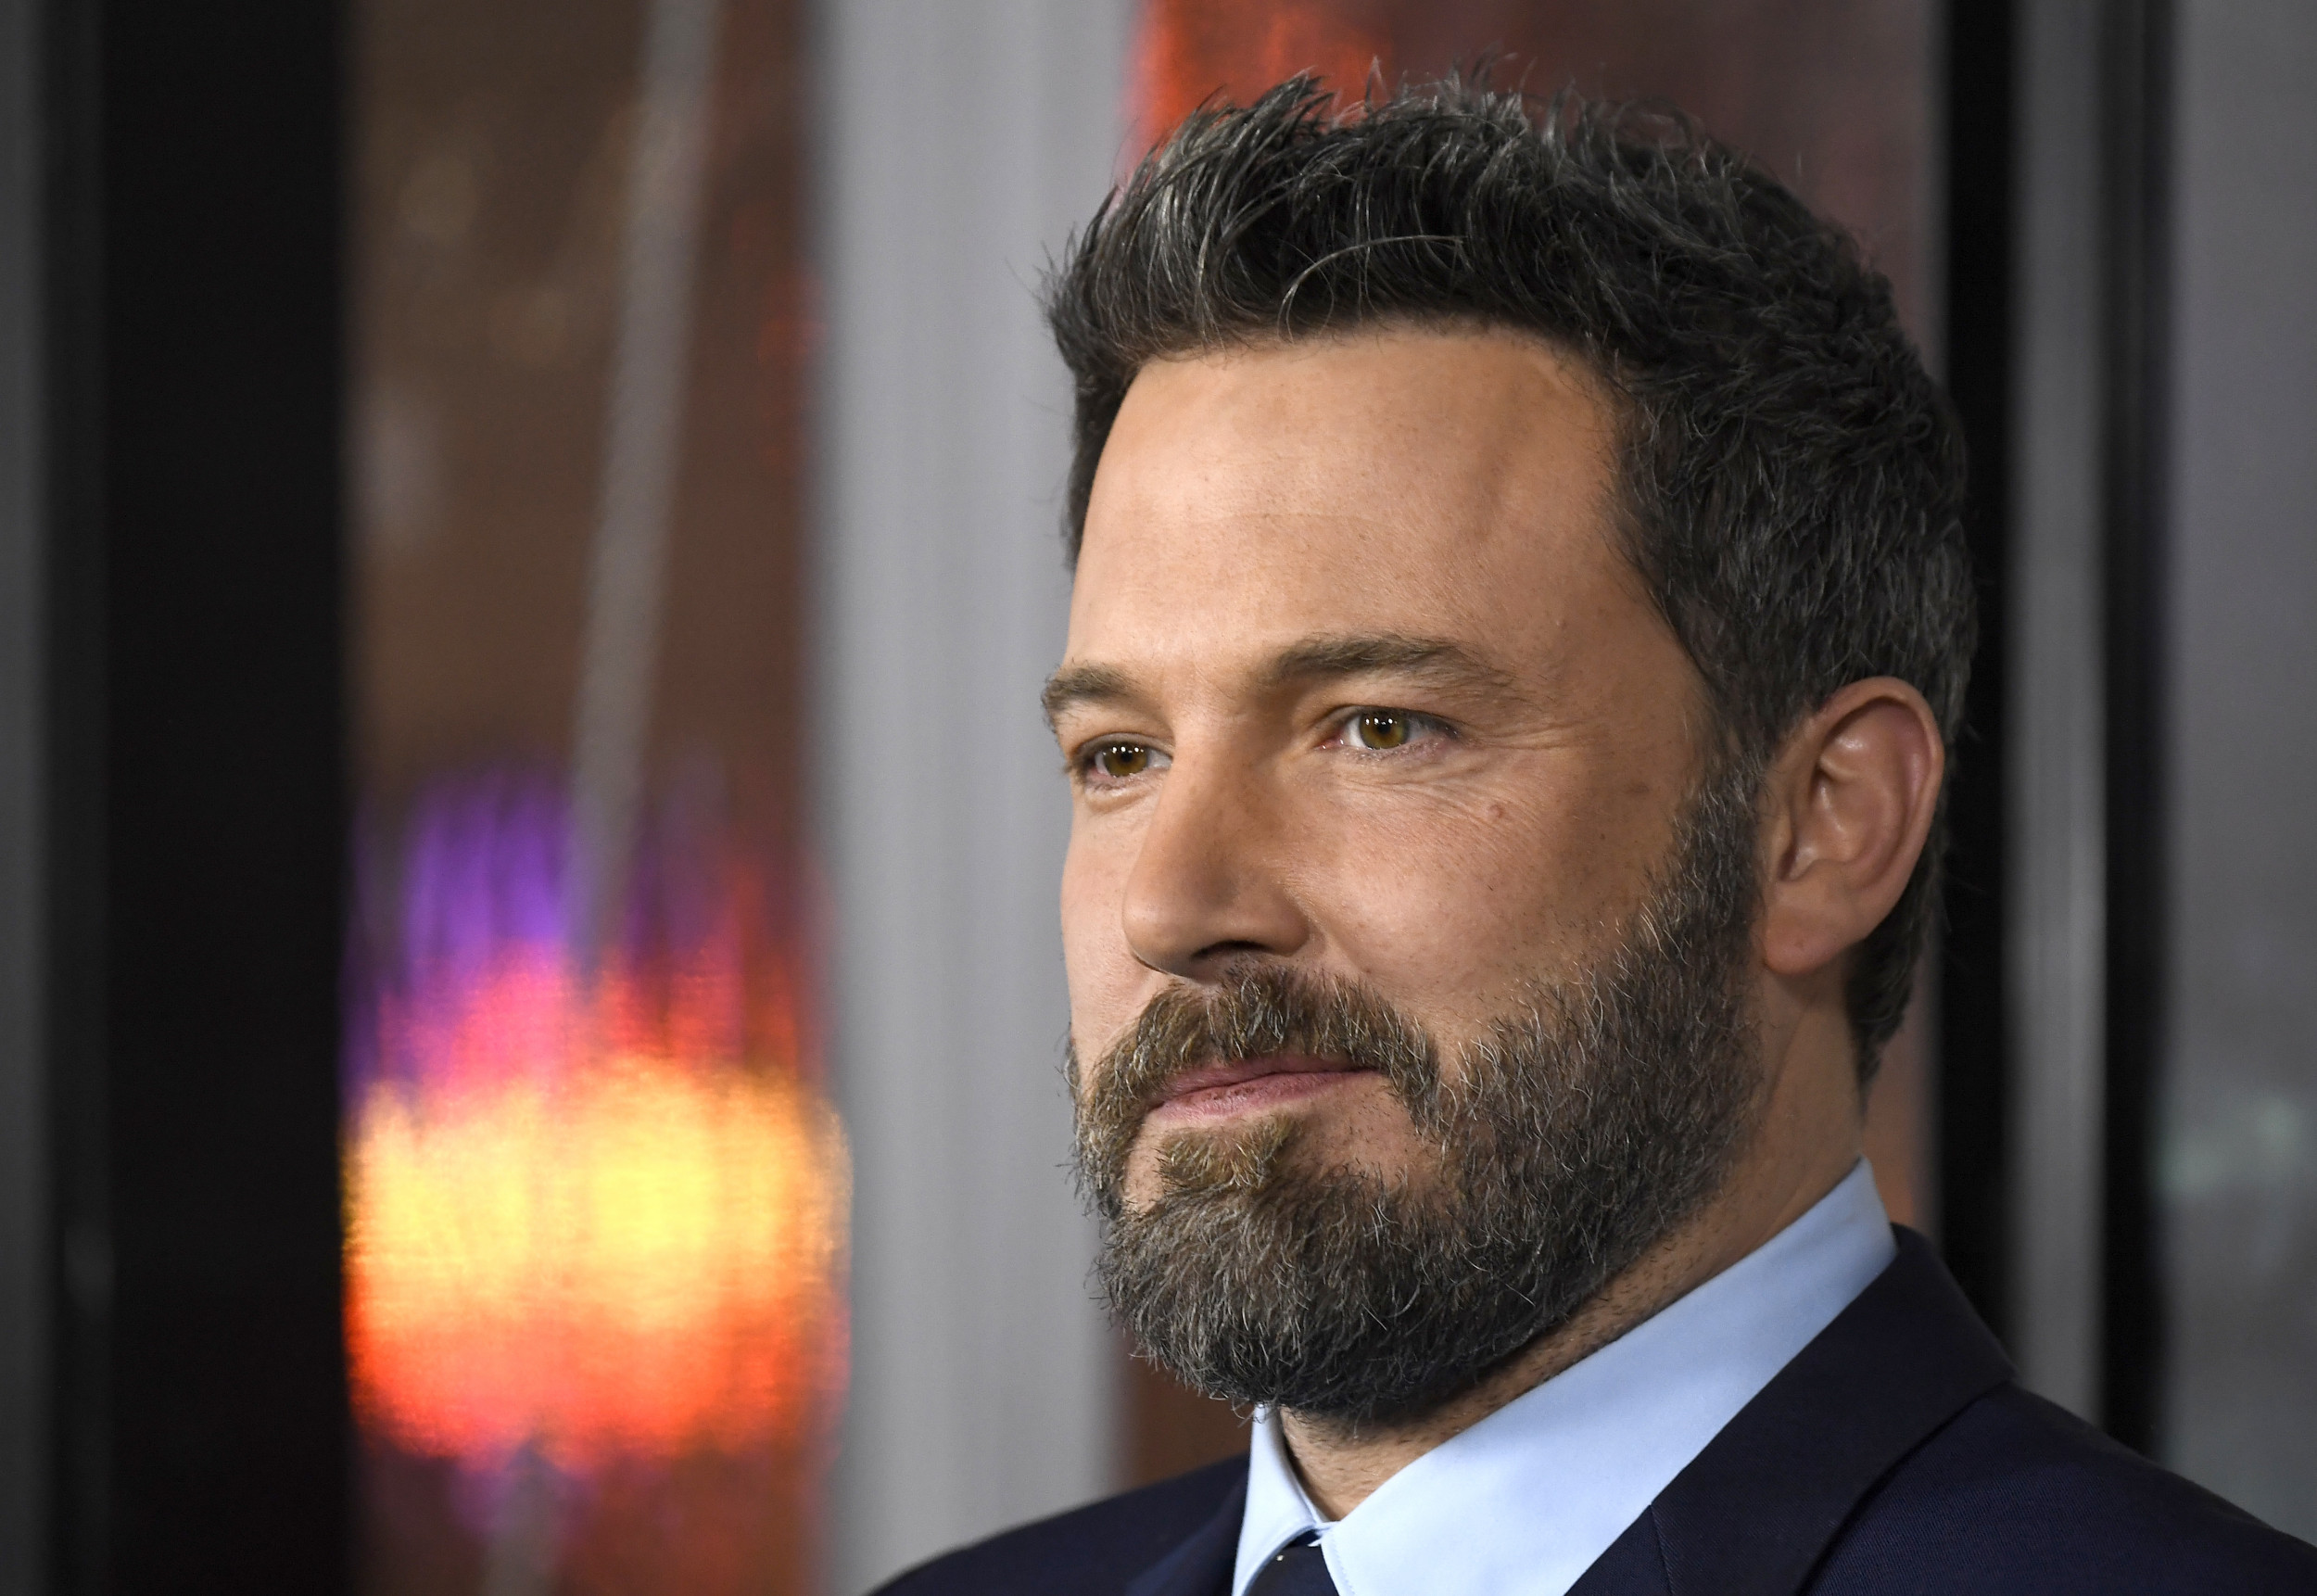 Ben Affleck Juggling Dunkin Donuts Iced Coffees Photo Inspires Wave of Memes 2020